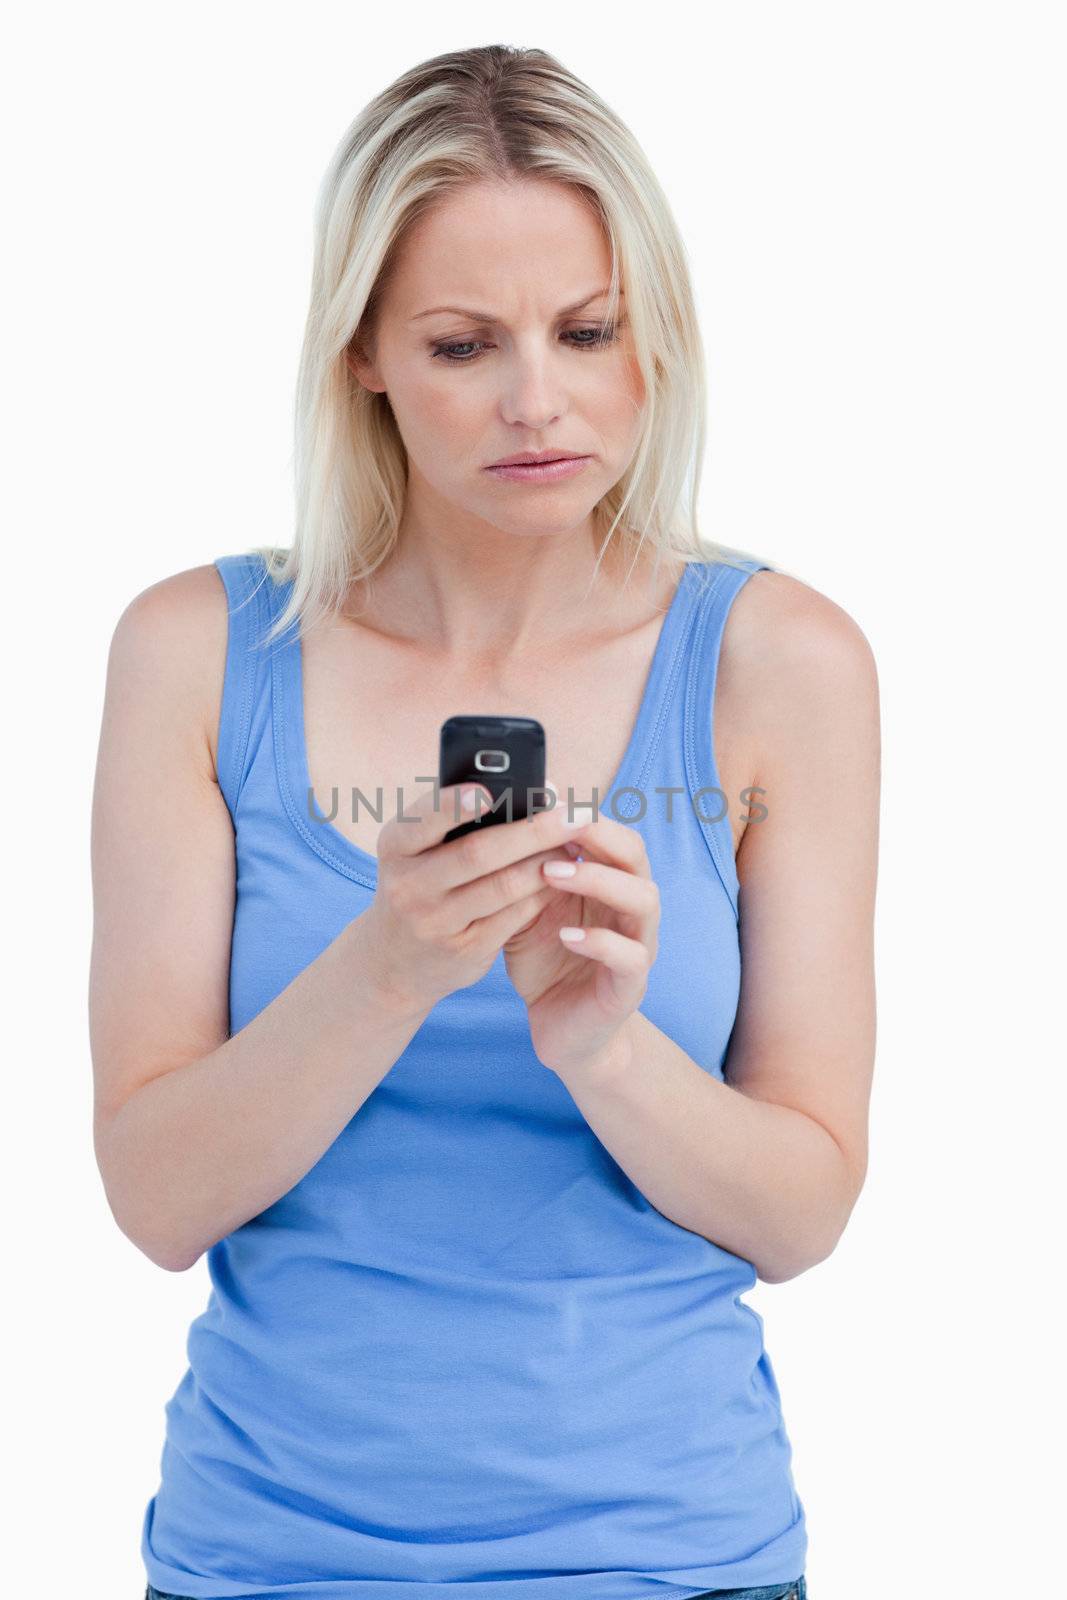 Serious blonde woman looking at her mobile phone against a white background